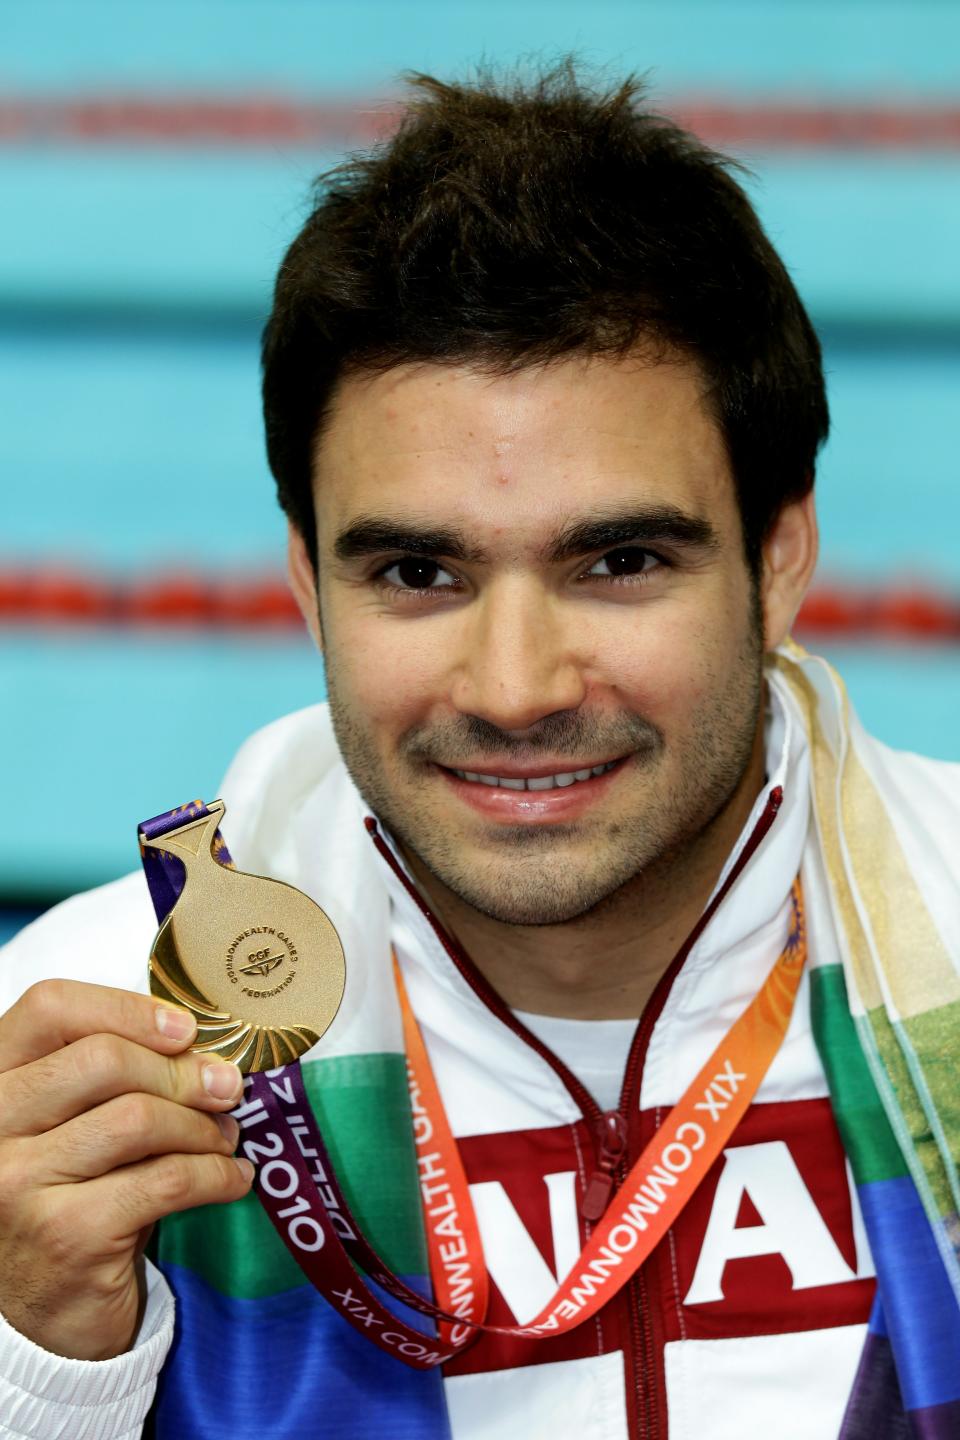 DELHI, INDIA - OCTOBER 11: Alexandre Despatie of Canada poses with the gold medal won in the Men's 3m Springboard Final at Dr. S.P. Mukherjee Aquatics Complex during day eight of the Delhi 2010 Commonwealth Games on October 11, 2010 in Delhi, India. (Photo by Matt King/Getty Images)